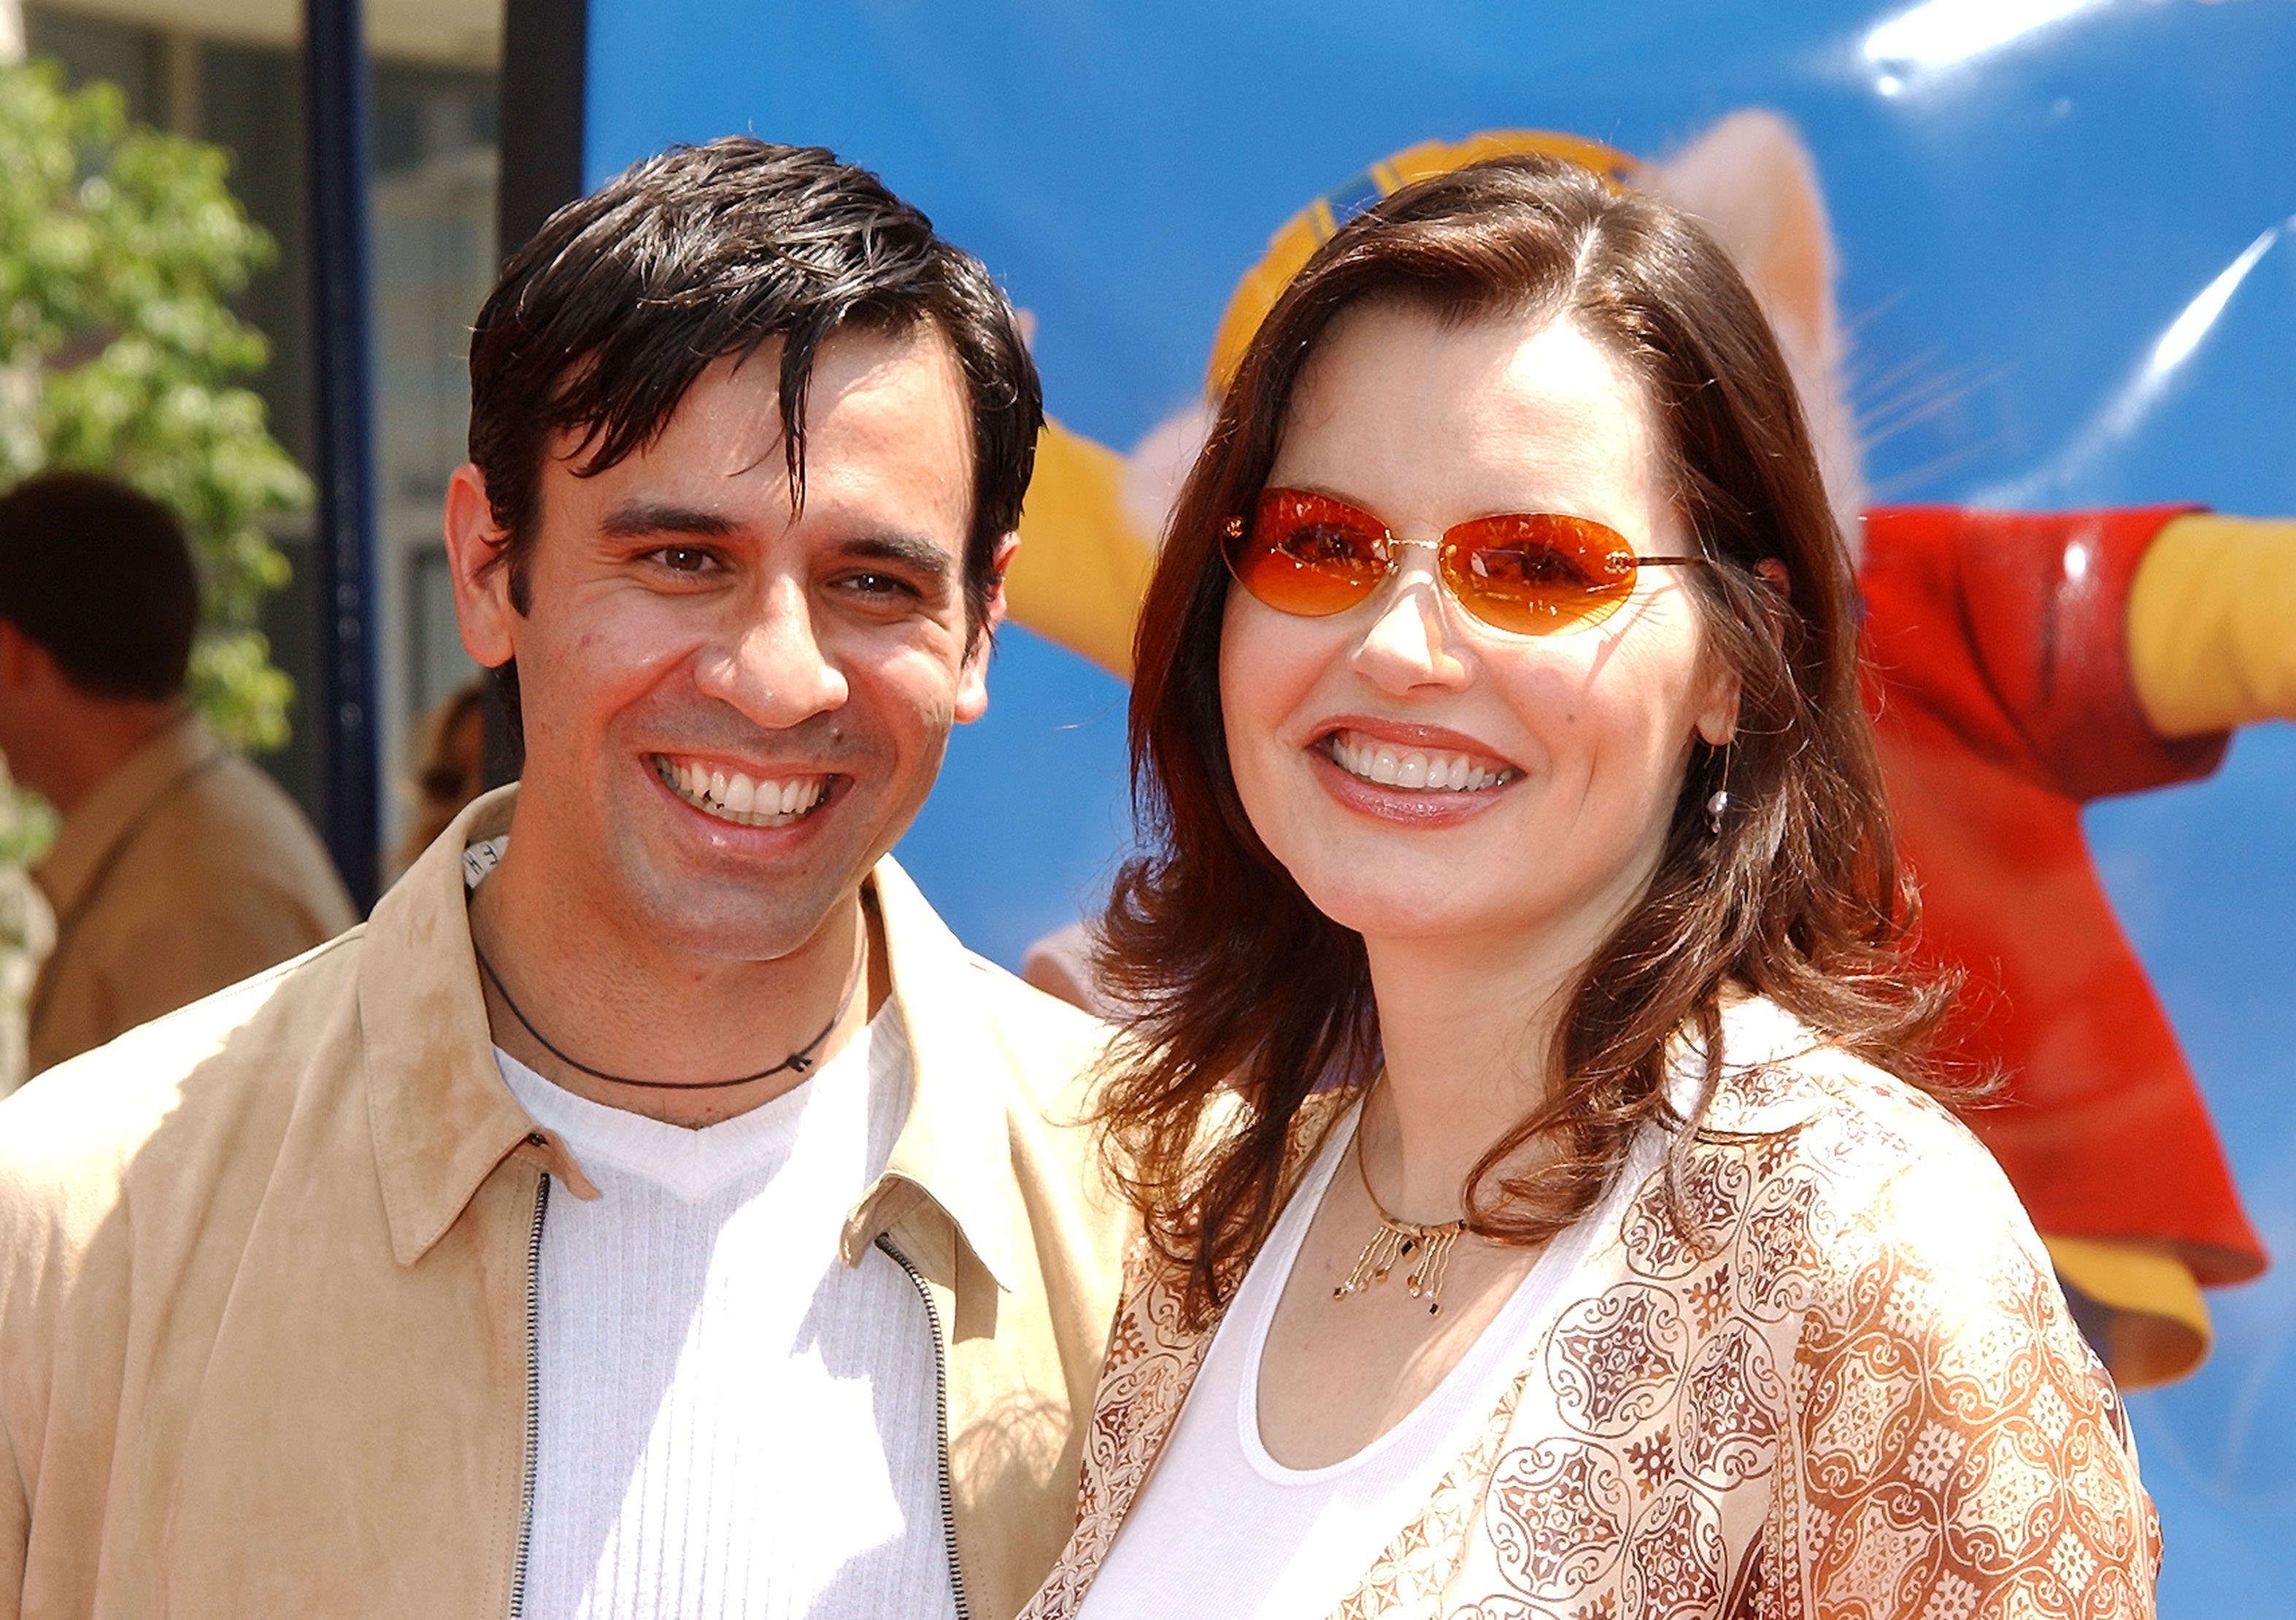 Geena Davis and her husband Reza Jarrahy during "Stuart Little 2" premiere at Mann Village Theatre in Westwood, California. / Source: Getty Images